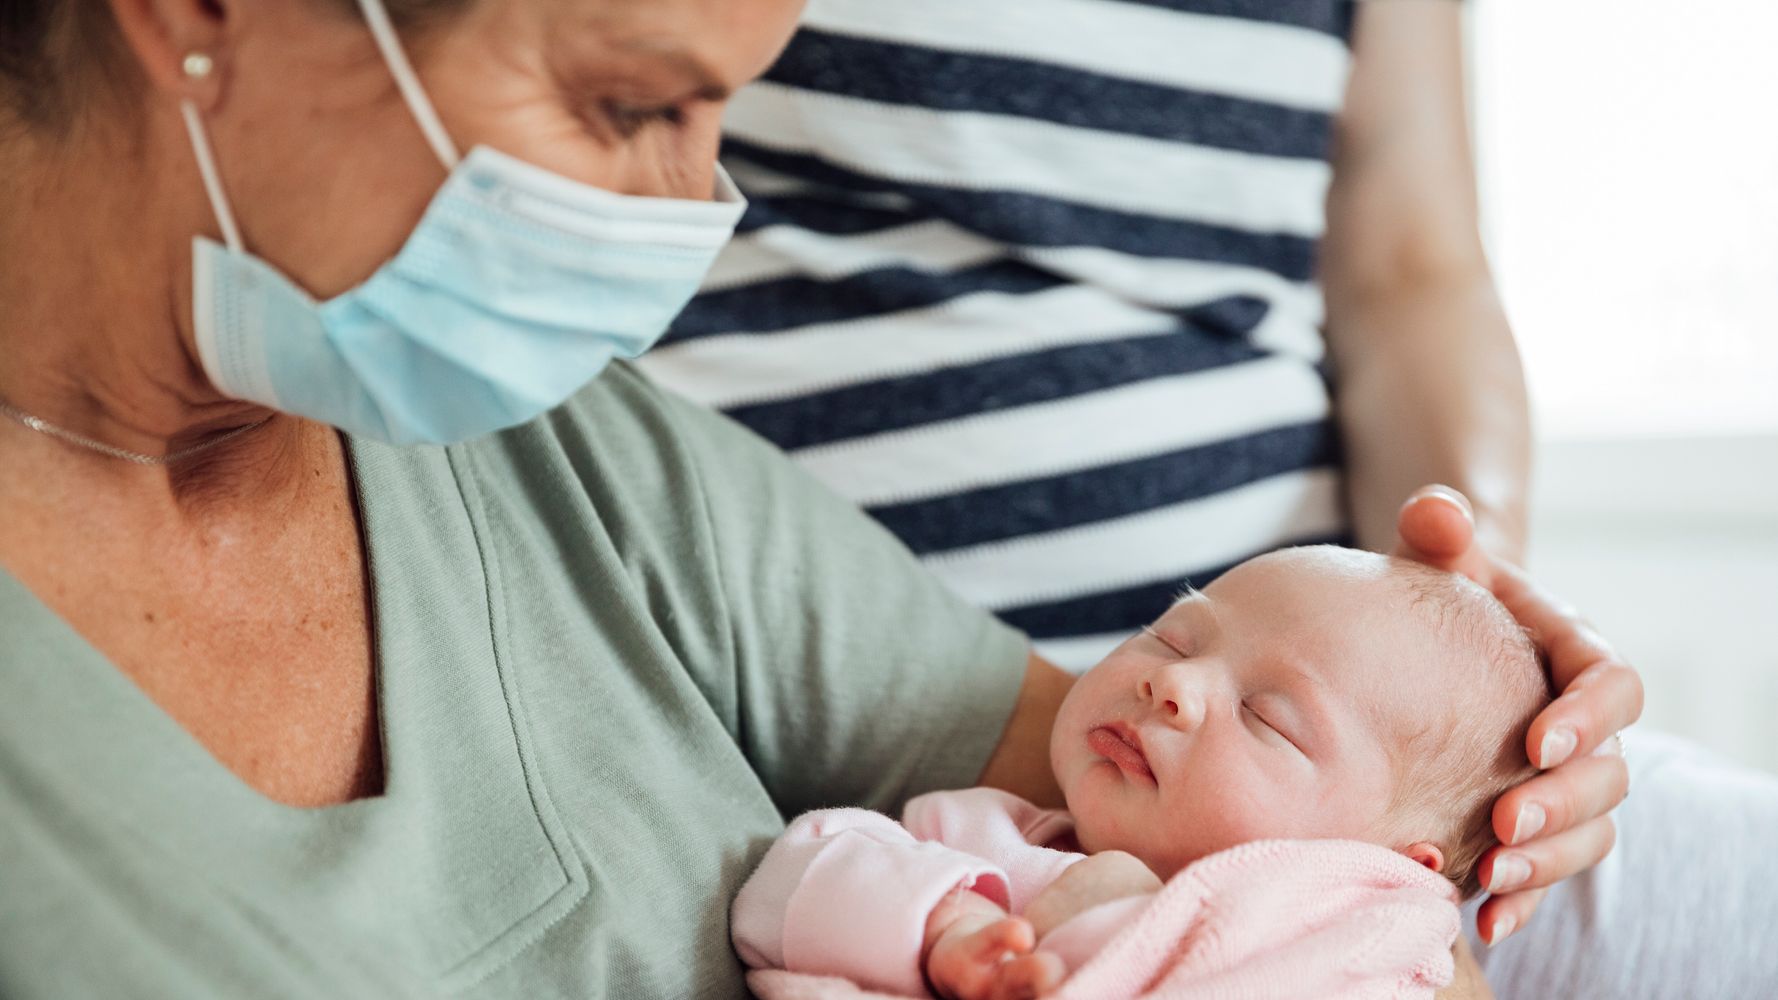 Should You Get The COVID-19 Vaccine Before Meeting A Newborn?